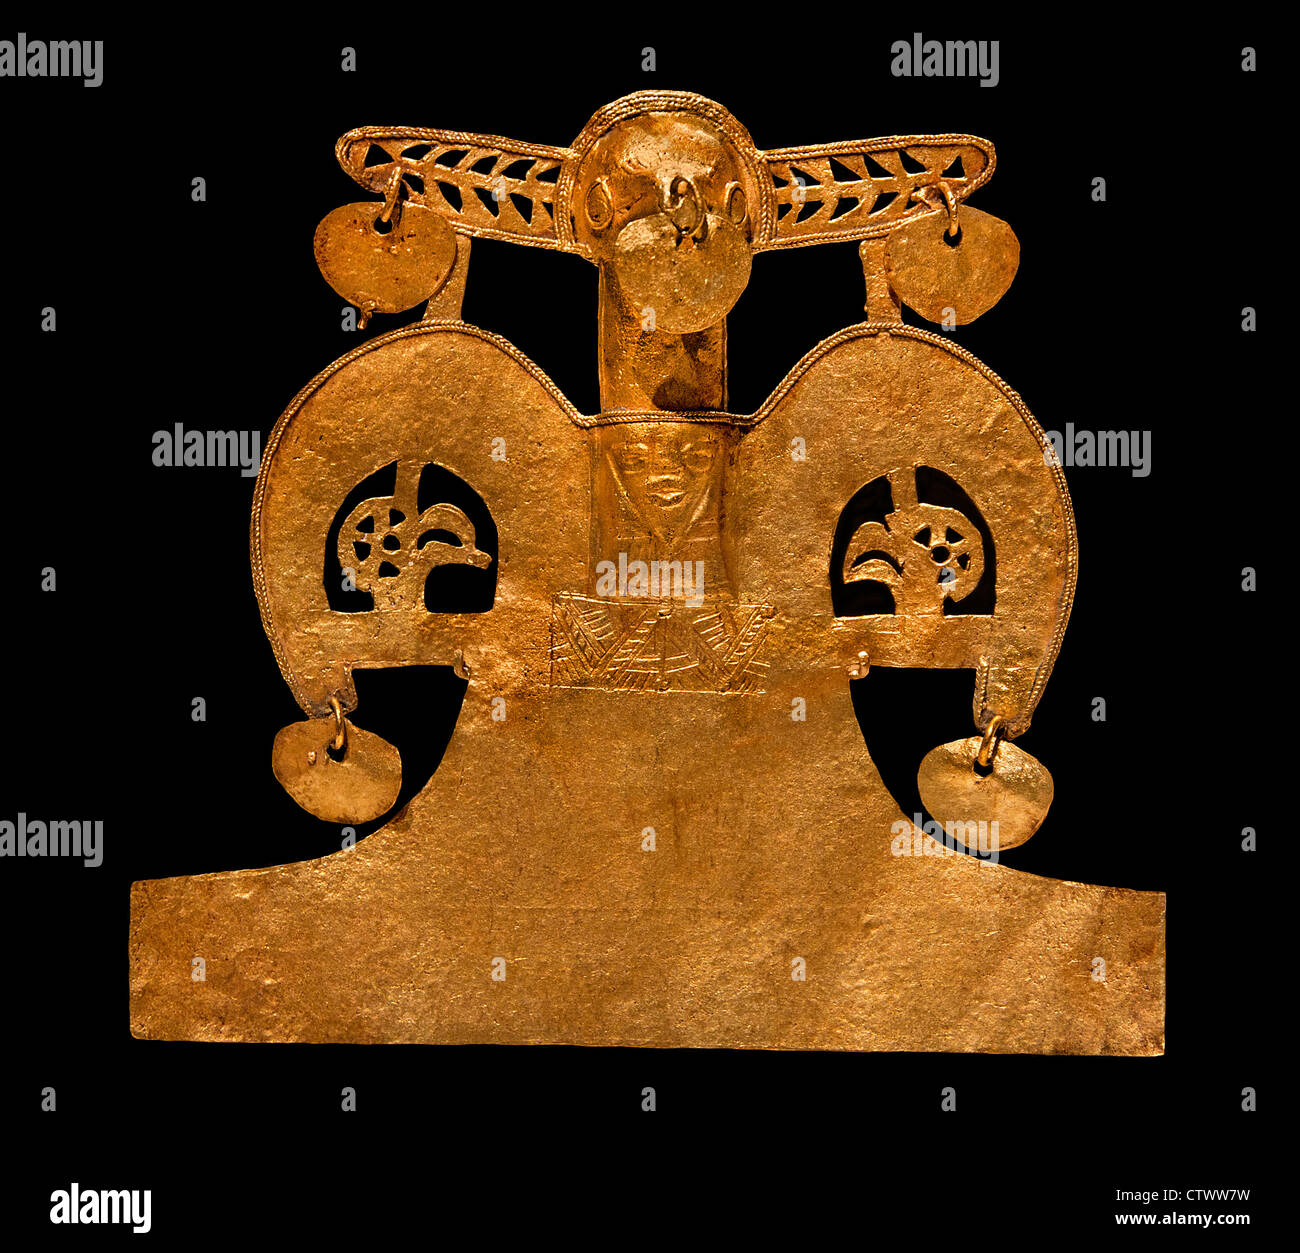 Bird Pendant 10th–16th century Colombia Culture Muisca Gold H. 4 x W. 4 3/8 x D. 3/4 in. (10.2 x 11.1 x 1.9 cm) Colombian Stock Photo